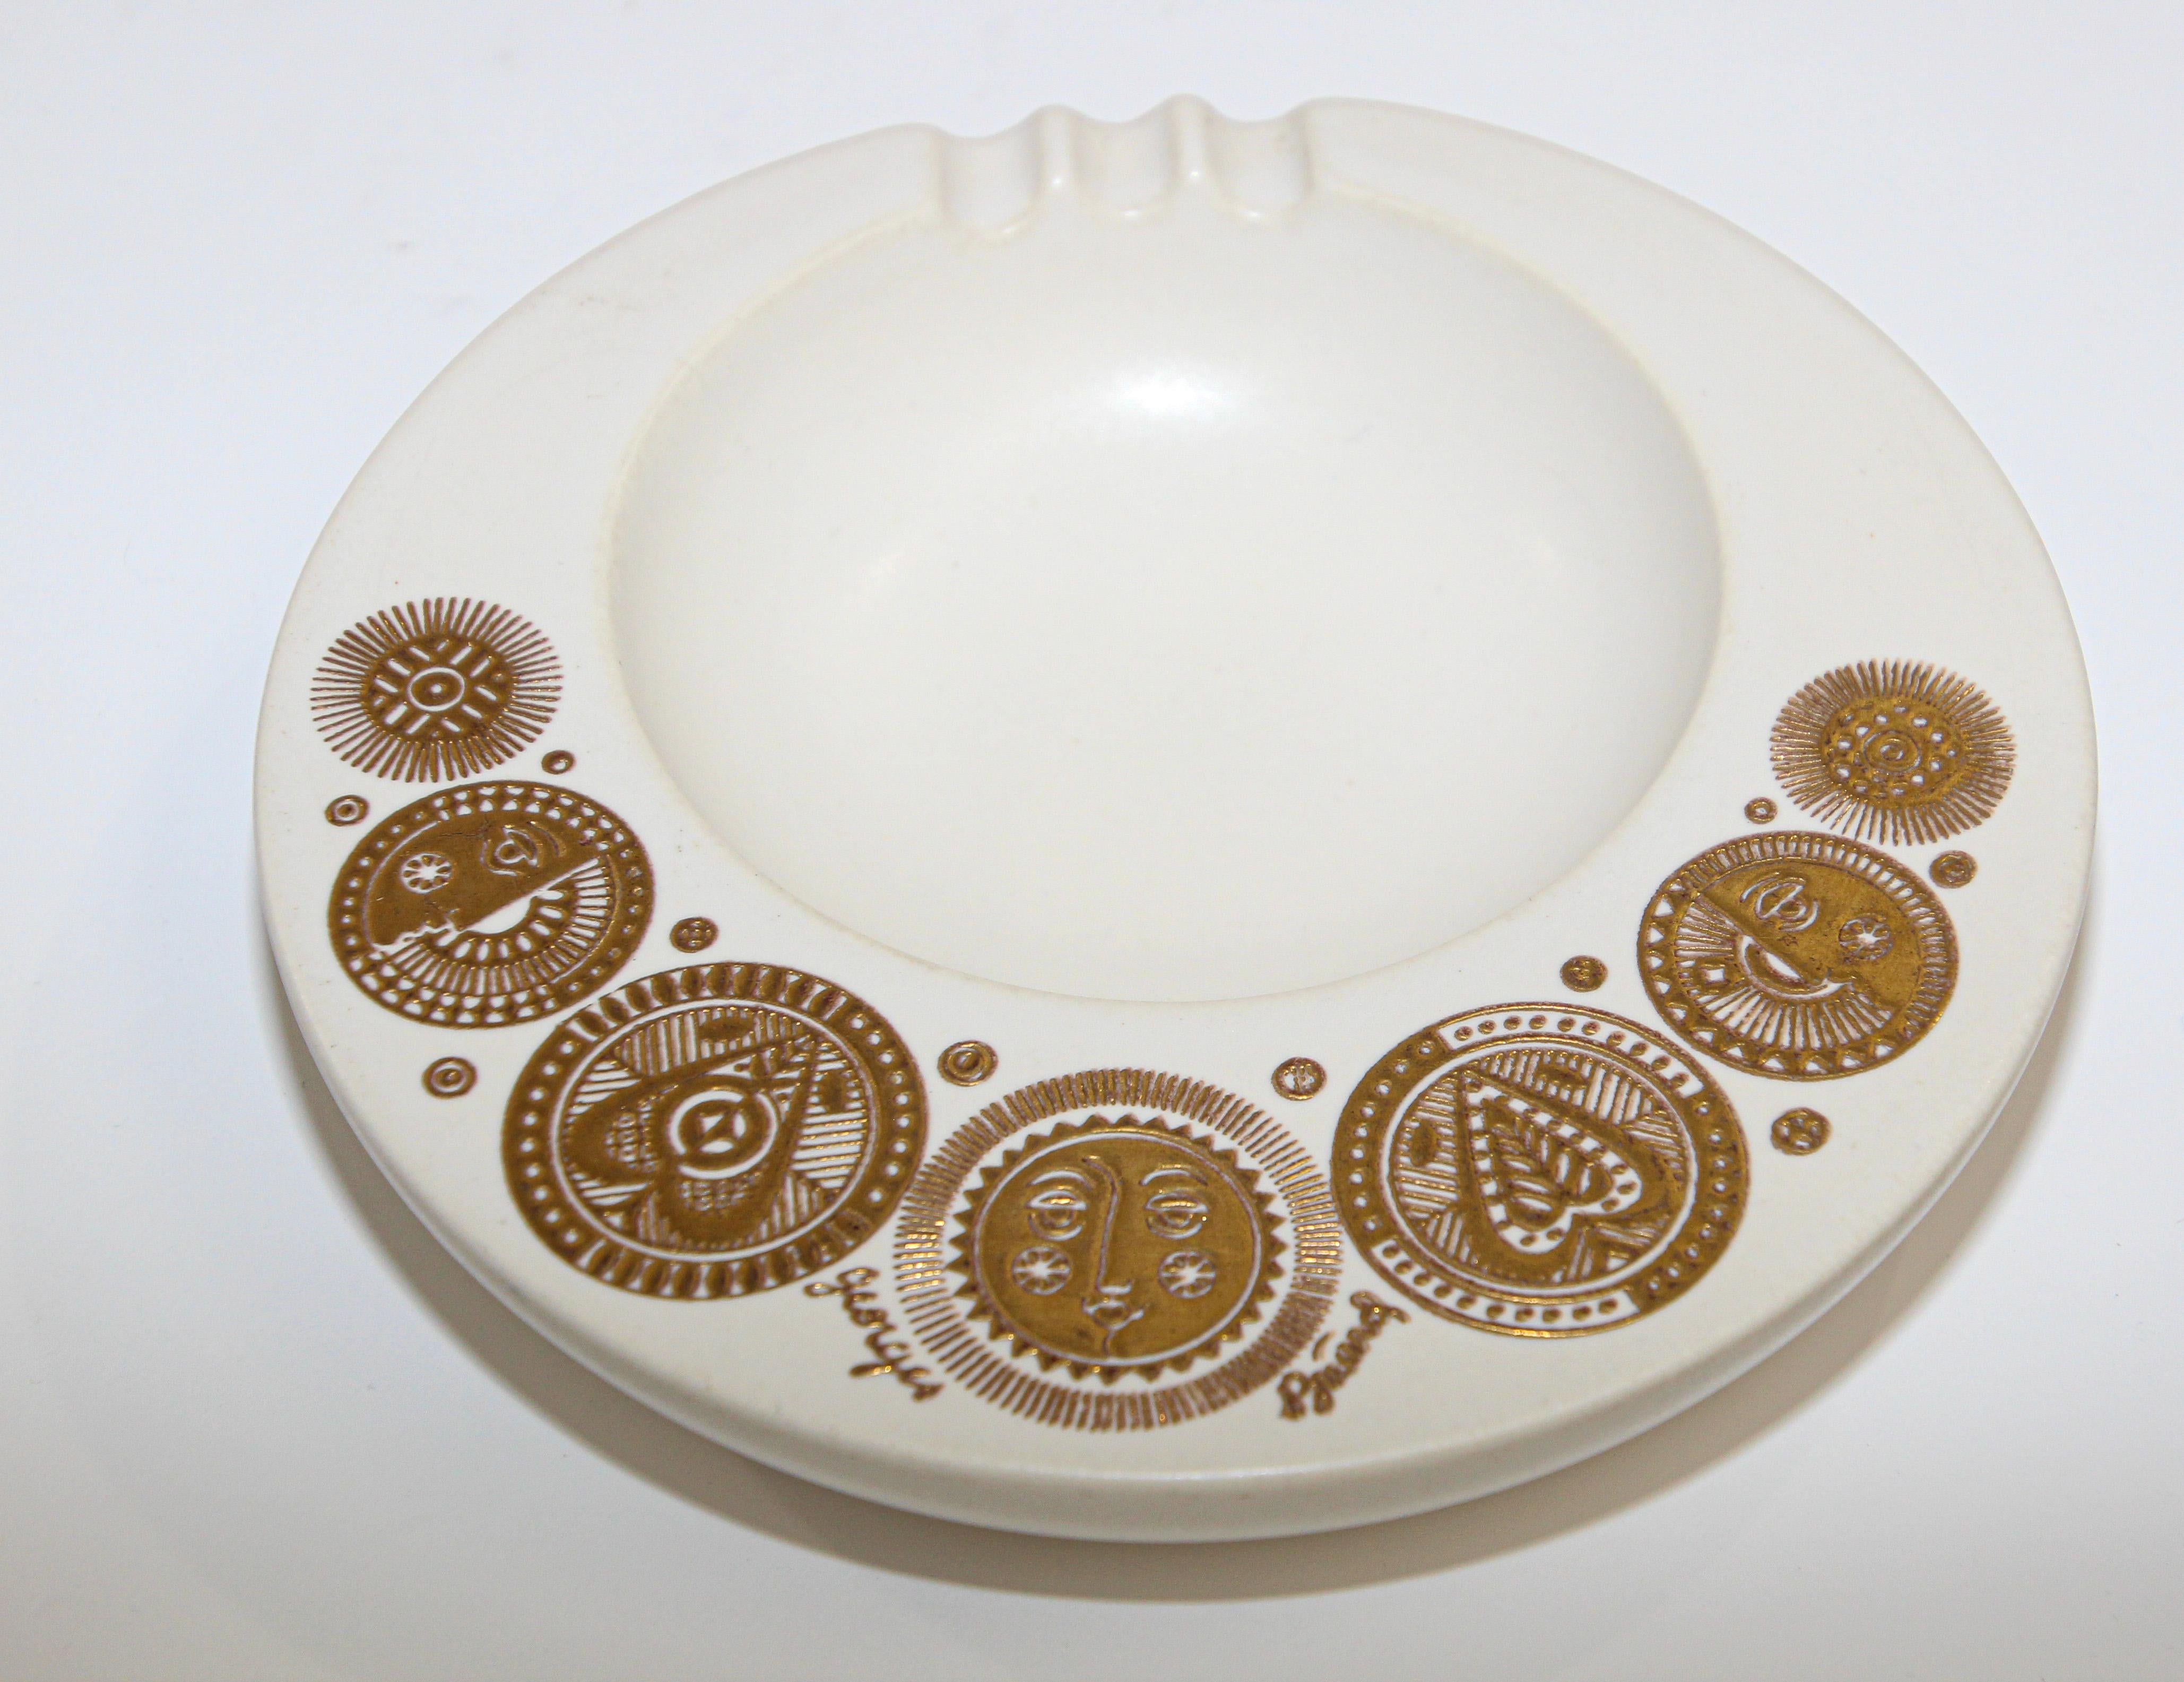 Georges Briard Midas Hyalyn Porcelain Ashtray with Gold Design For Sale 2